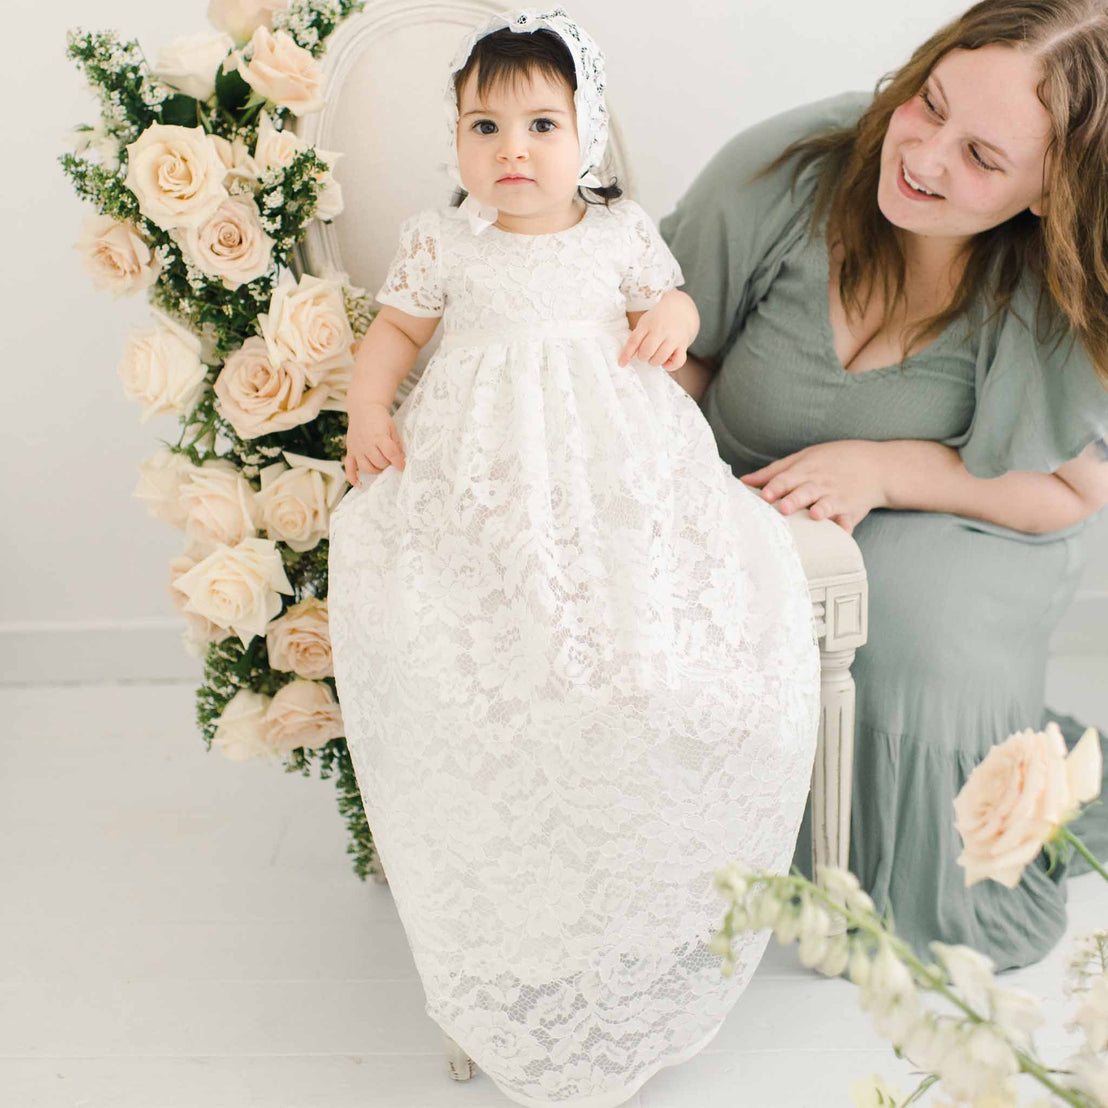 A woman in a gray dress smiles at a baby in the Rose Christening Gown & Bonnet, sitting in a chair surrounded by cream roses in a bright, airy room.